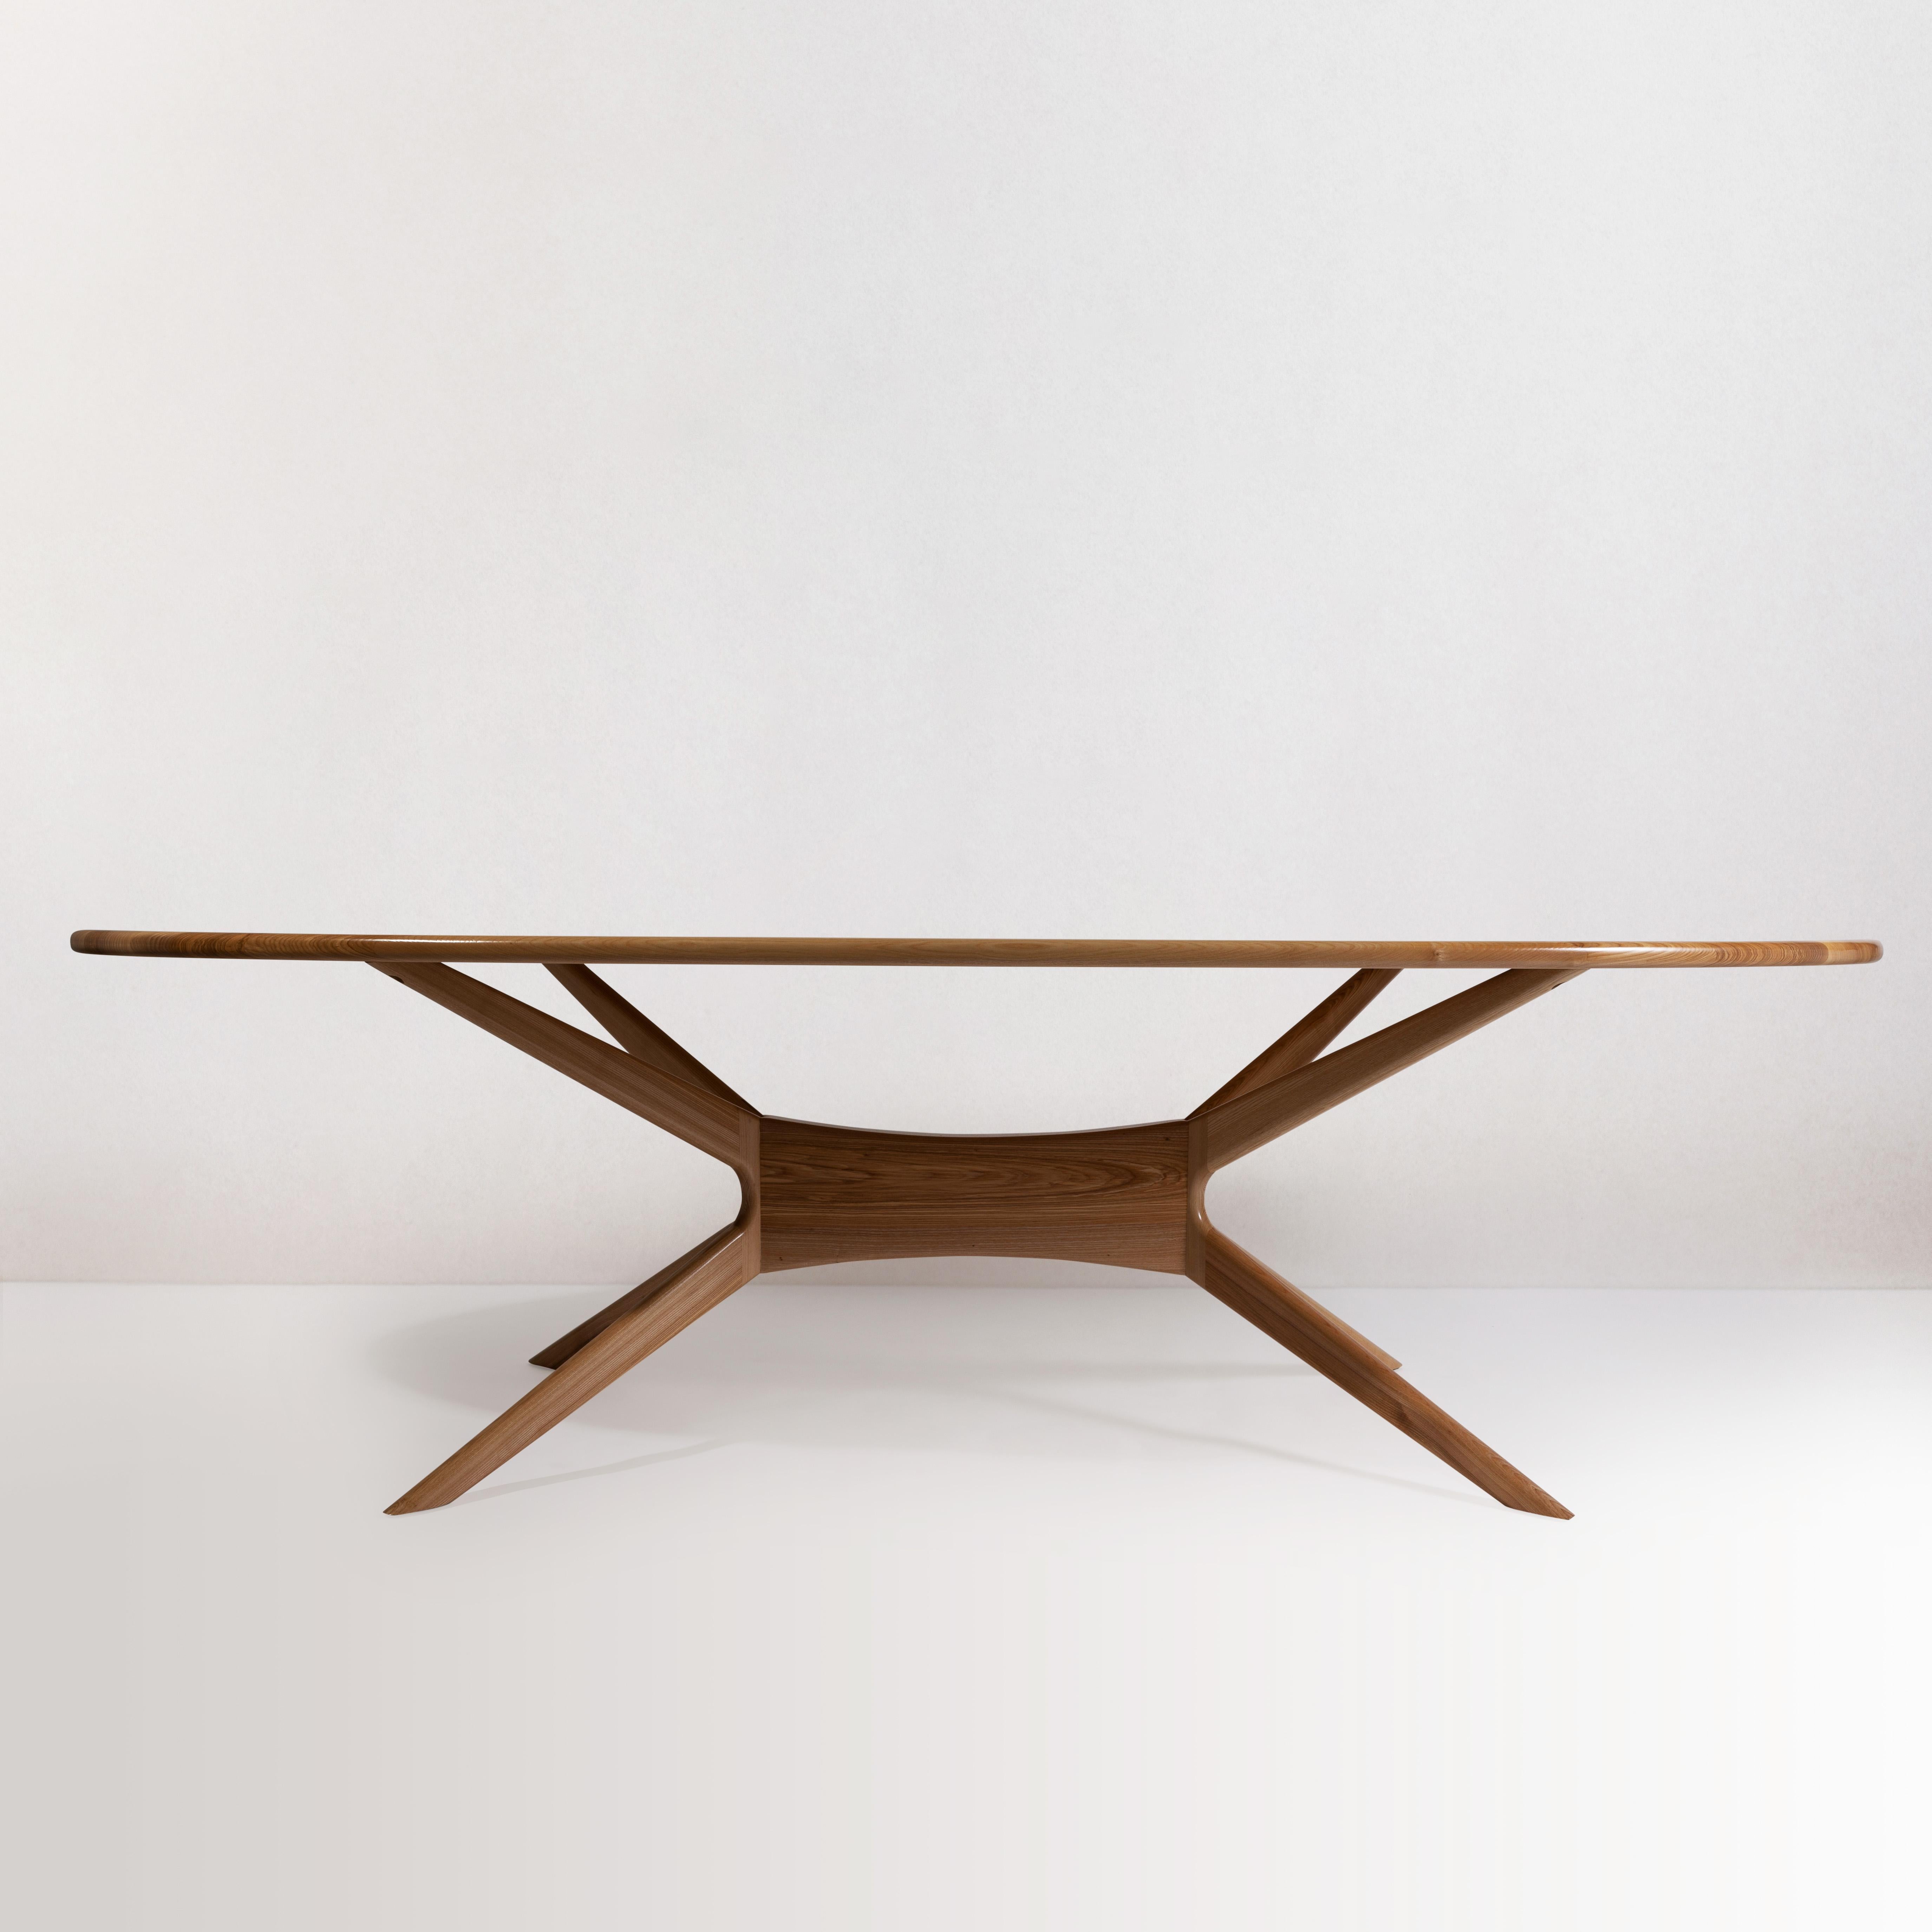 A modern style luxury dining room table, the Elmond Dining Room Table offers a unique design with a long oval style table that can comfortably sit eight people. A table that is perfect for meals and conversation that will last generation after